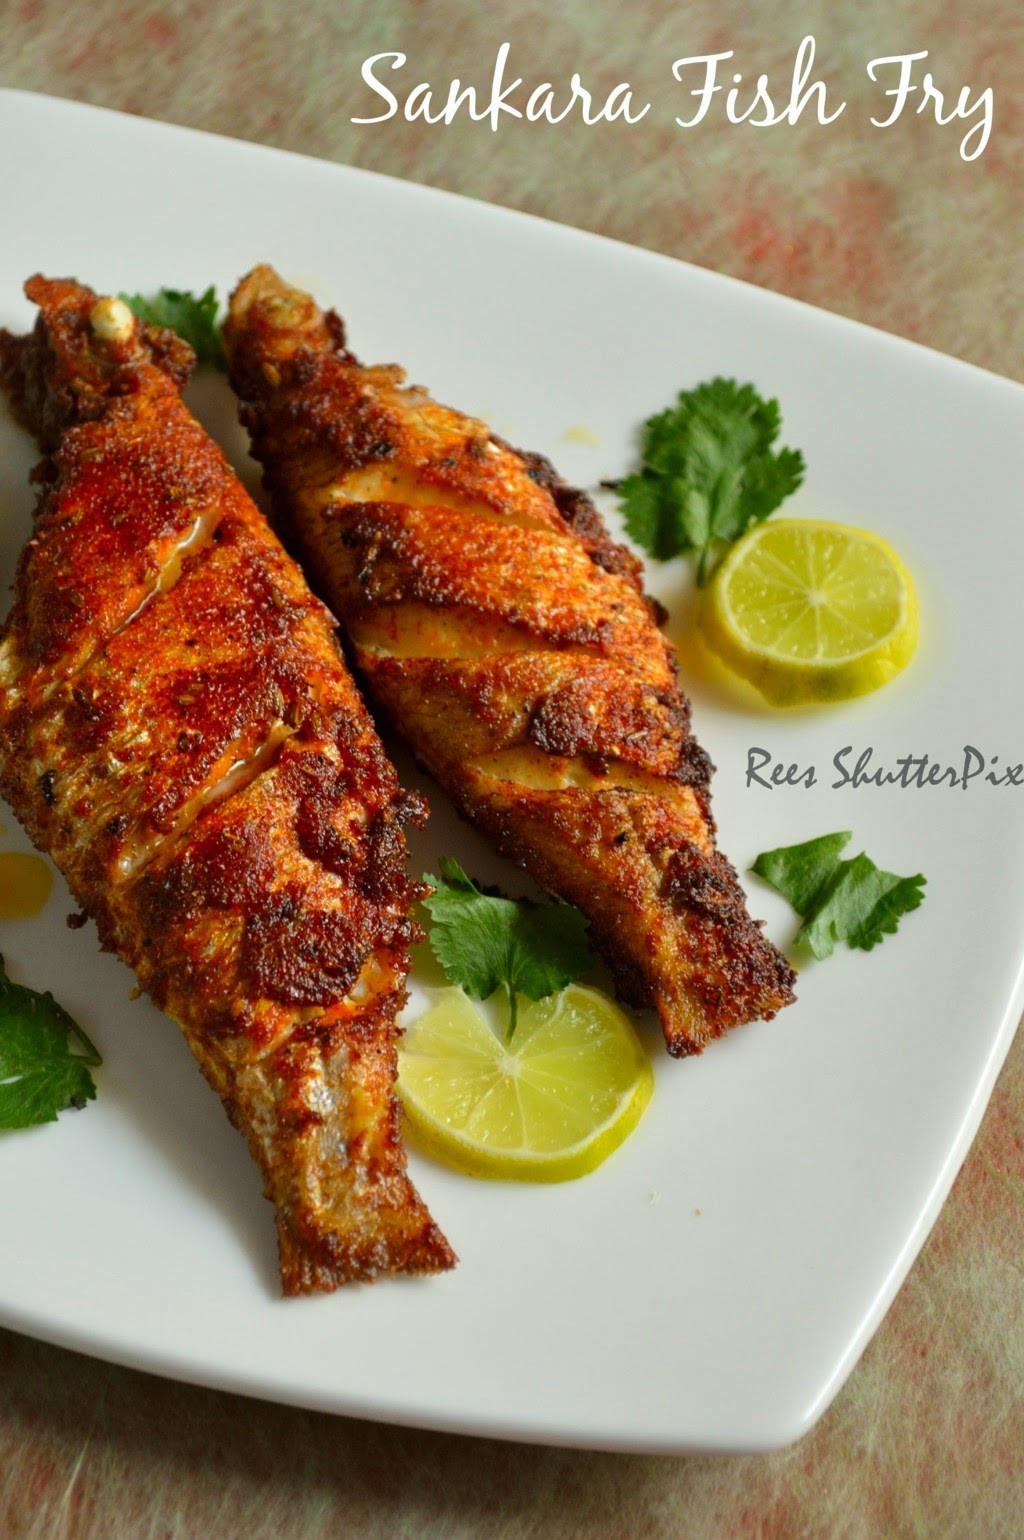 Red Snapper Fish Recipes
 Red Snapper Fish Fry Recipe